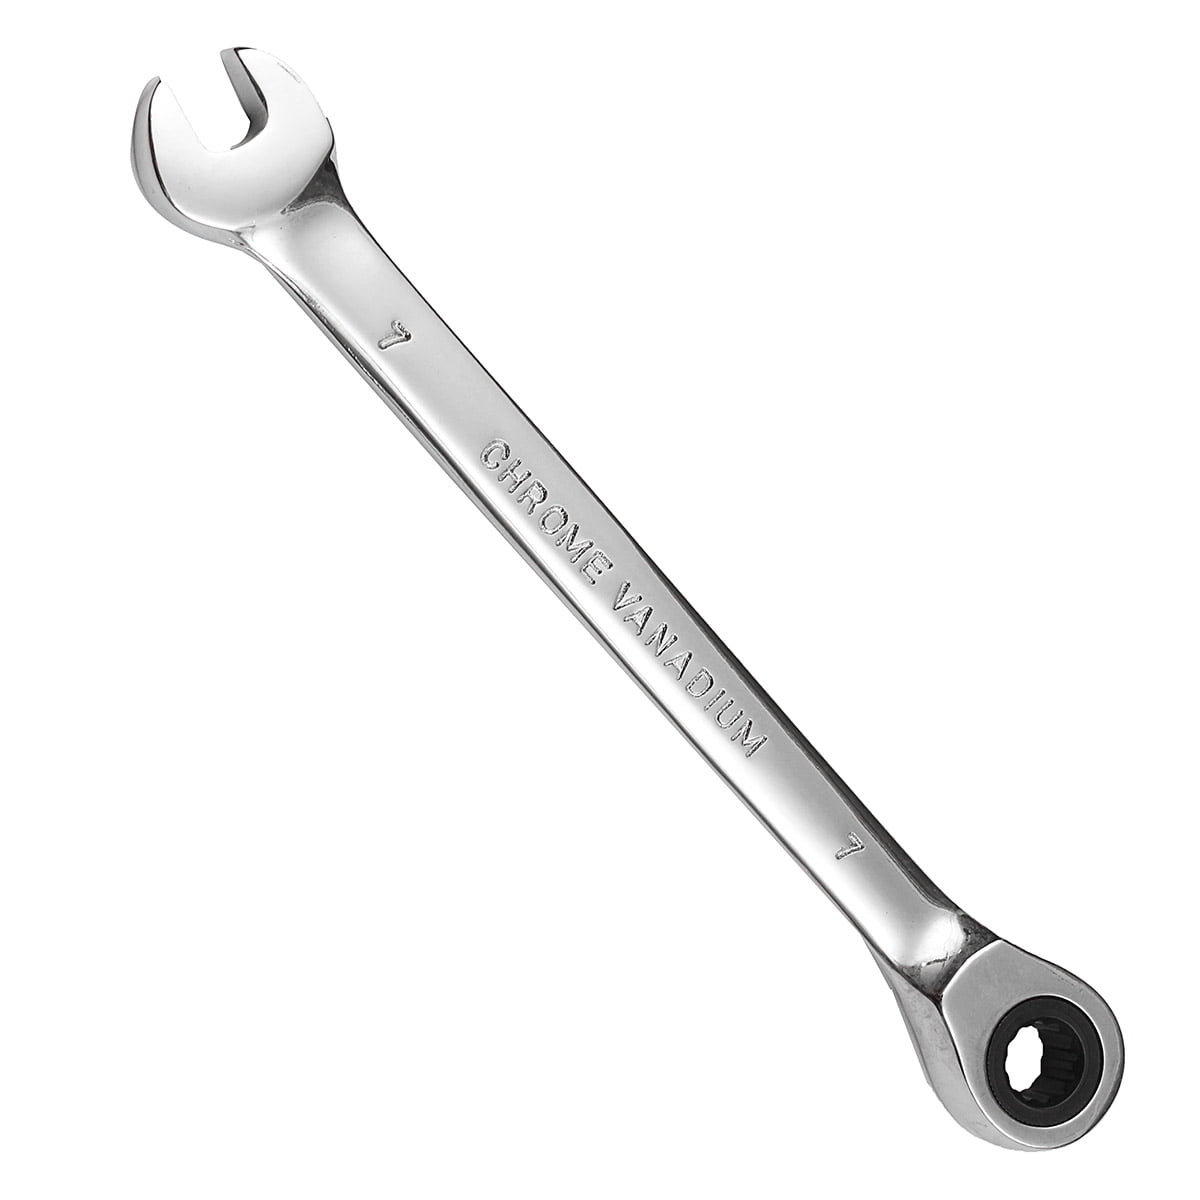 Large/Small Head Combination Wrench Spanner 6-32mm Steel Gear Open End And Ring